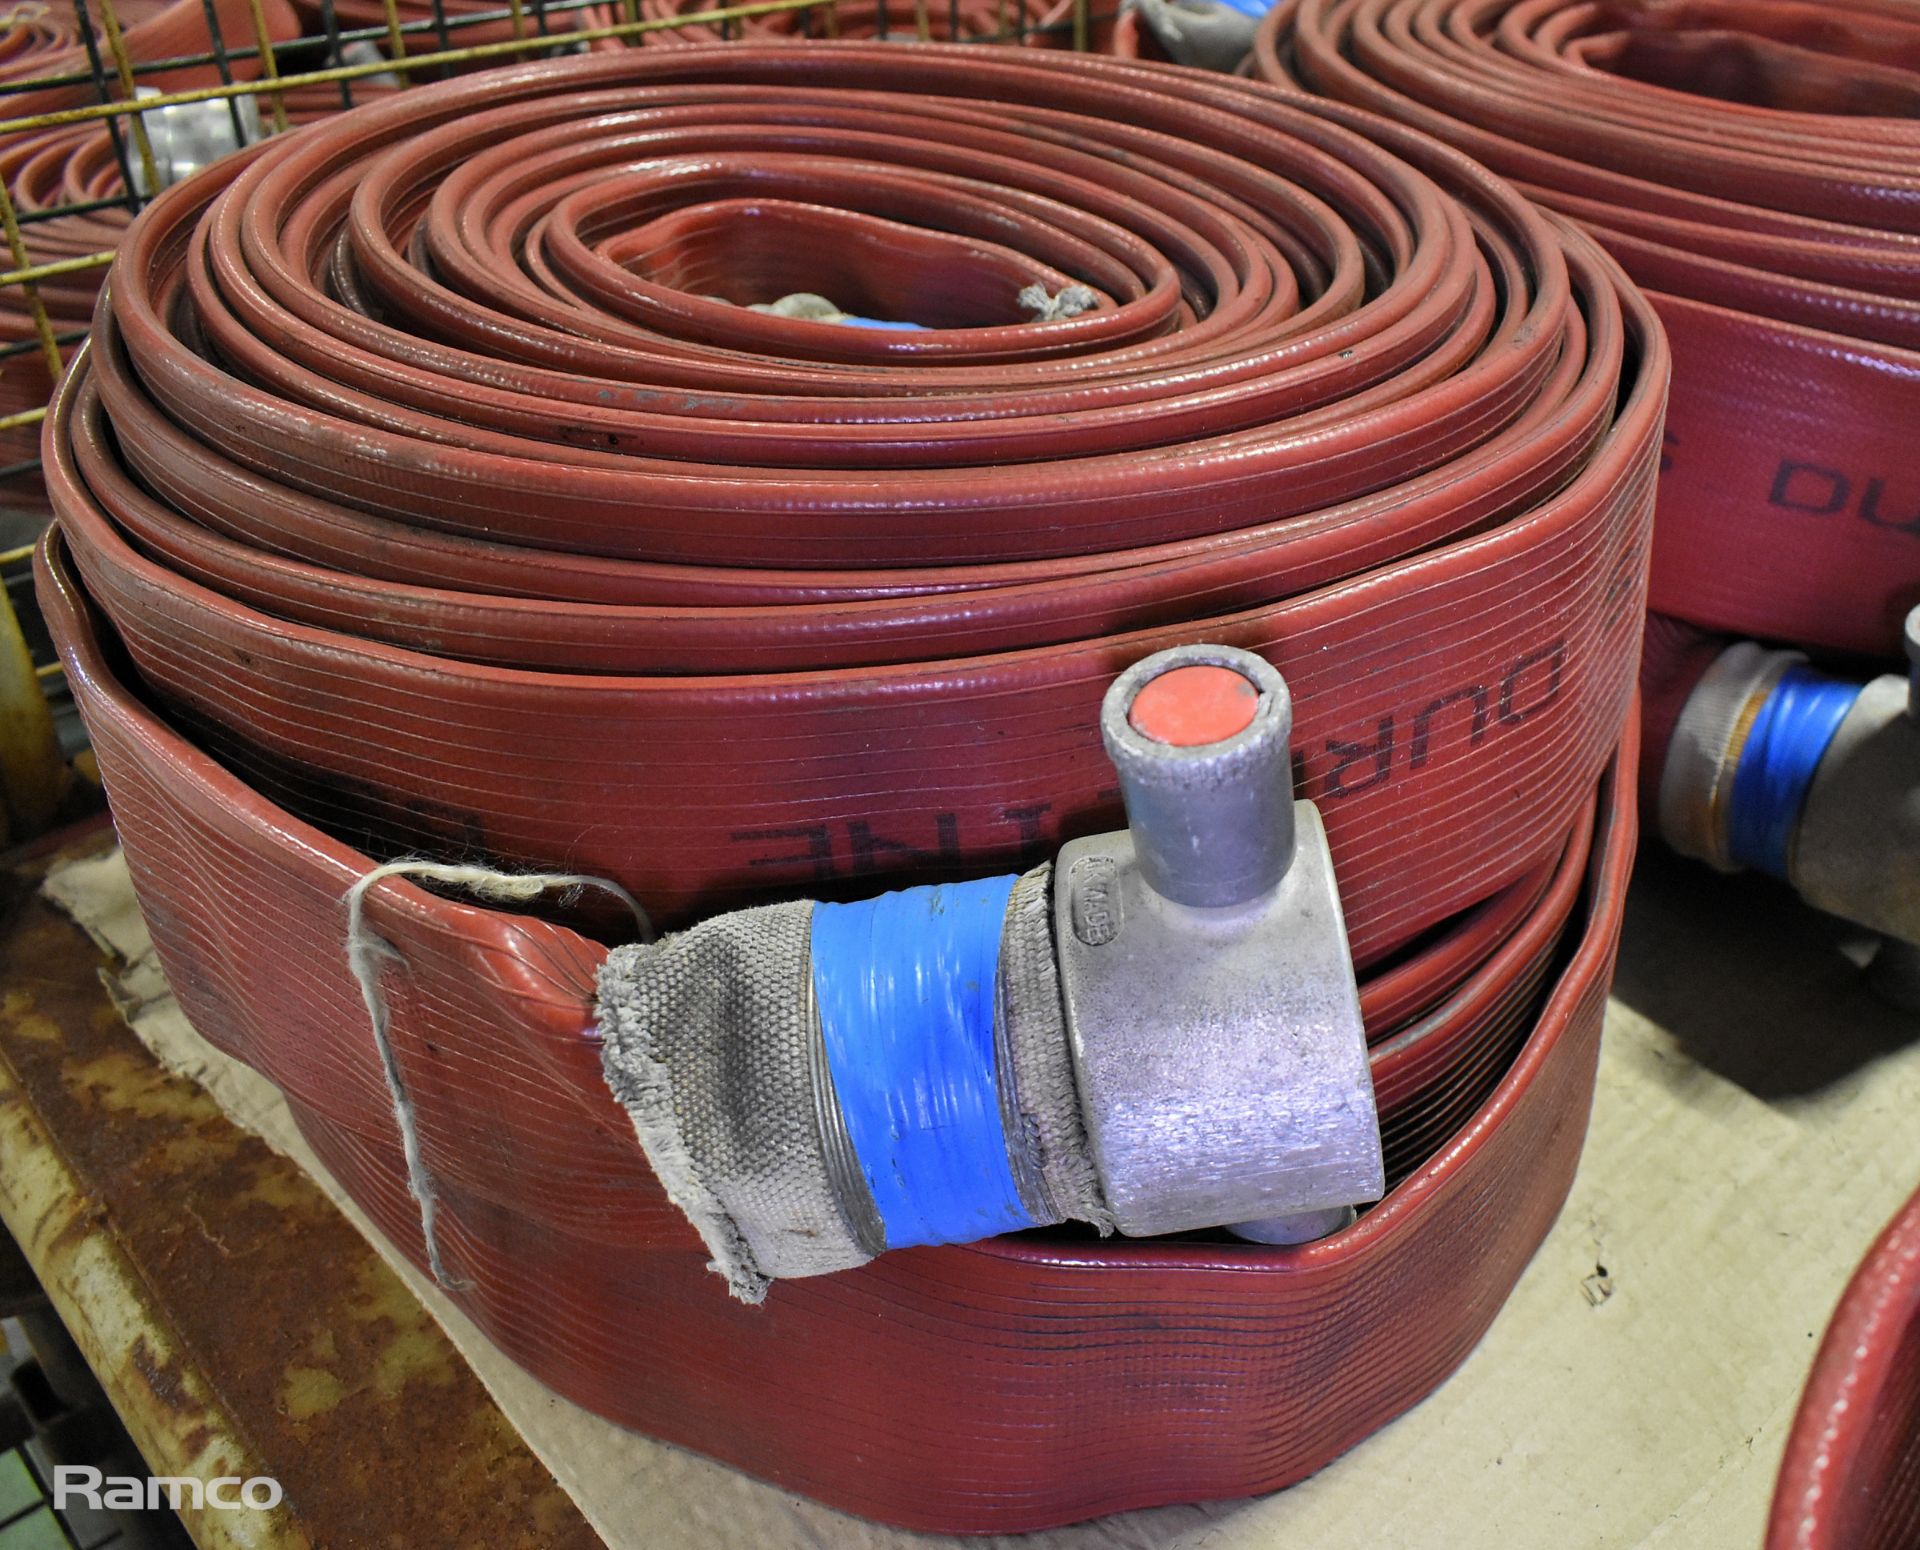 8x Angus Duraline 70mm lay flat hoses with couplings - approx 23m in length - Image 3 of 4